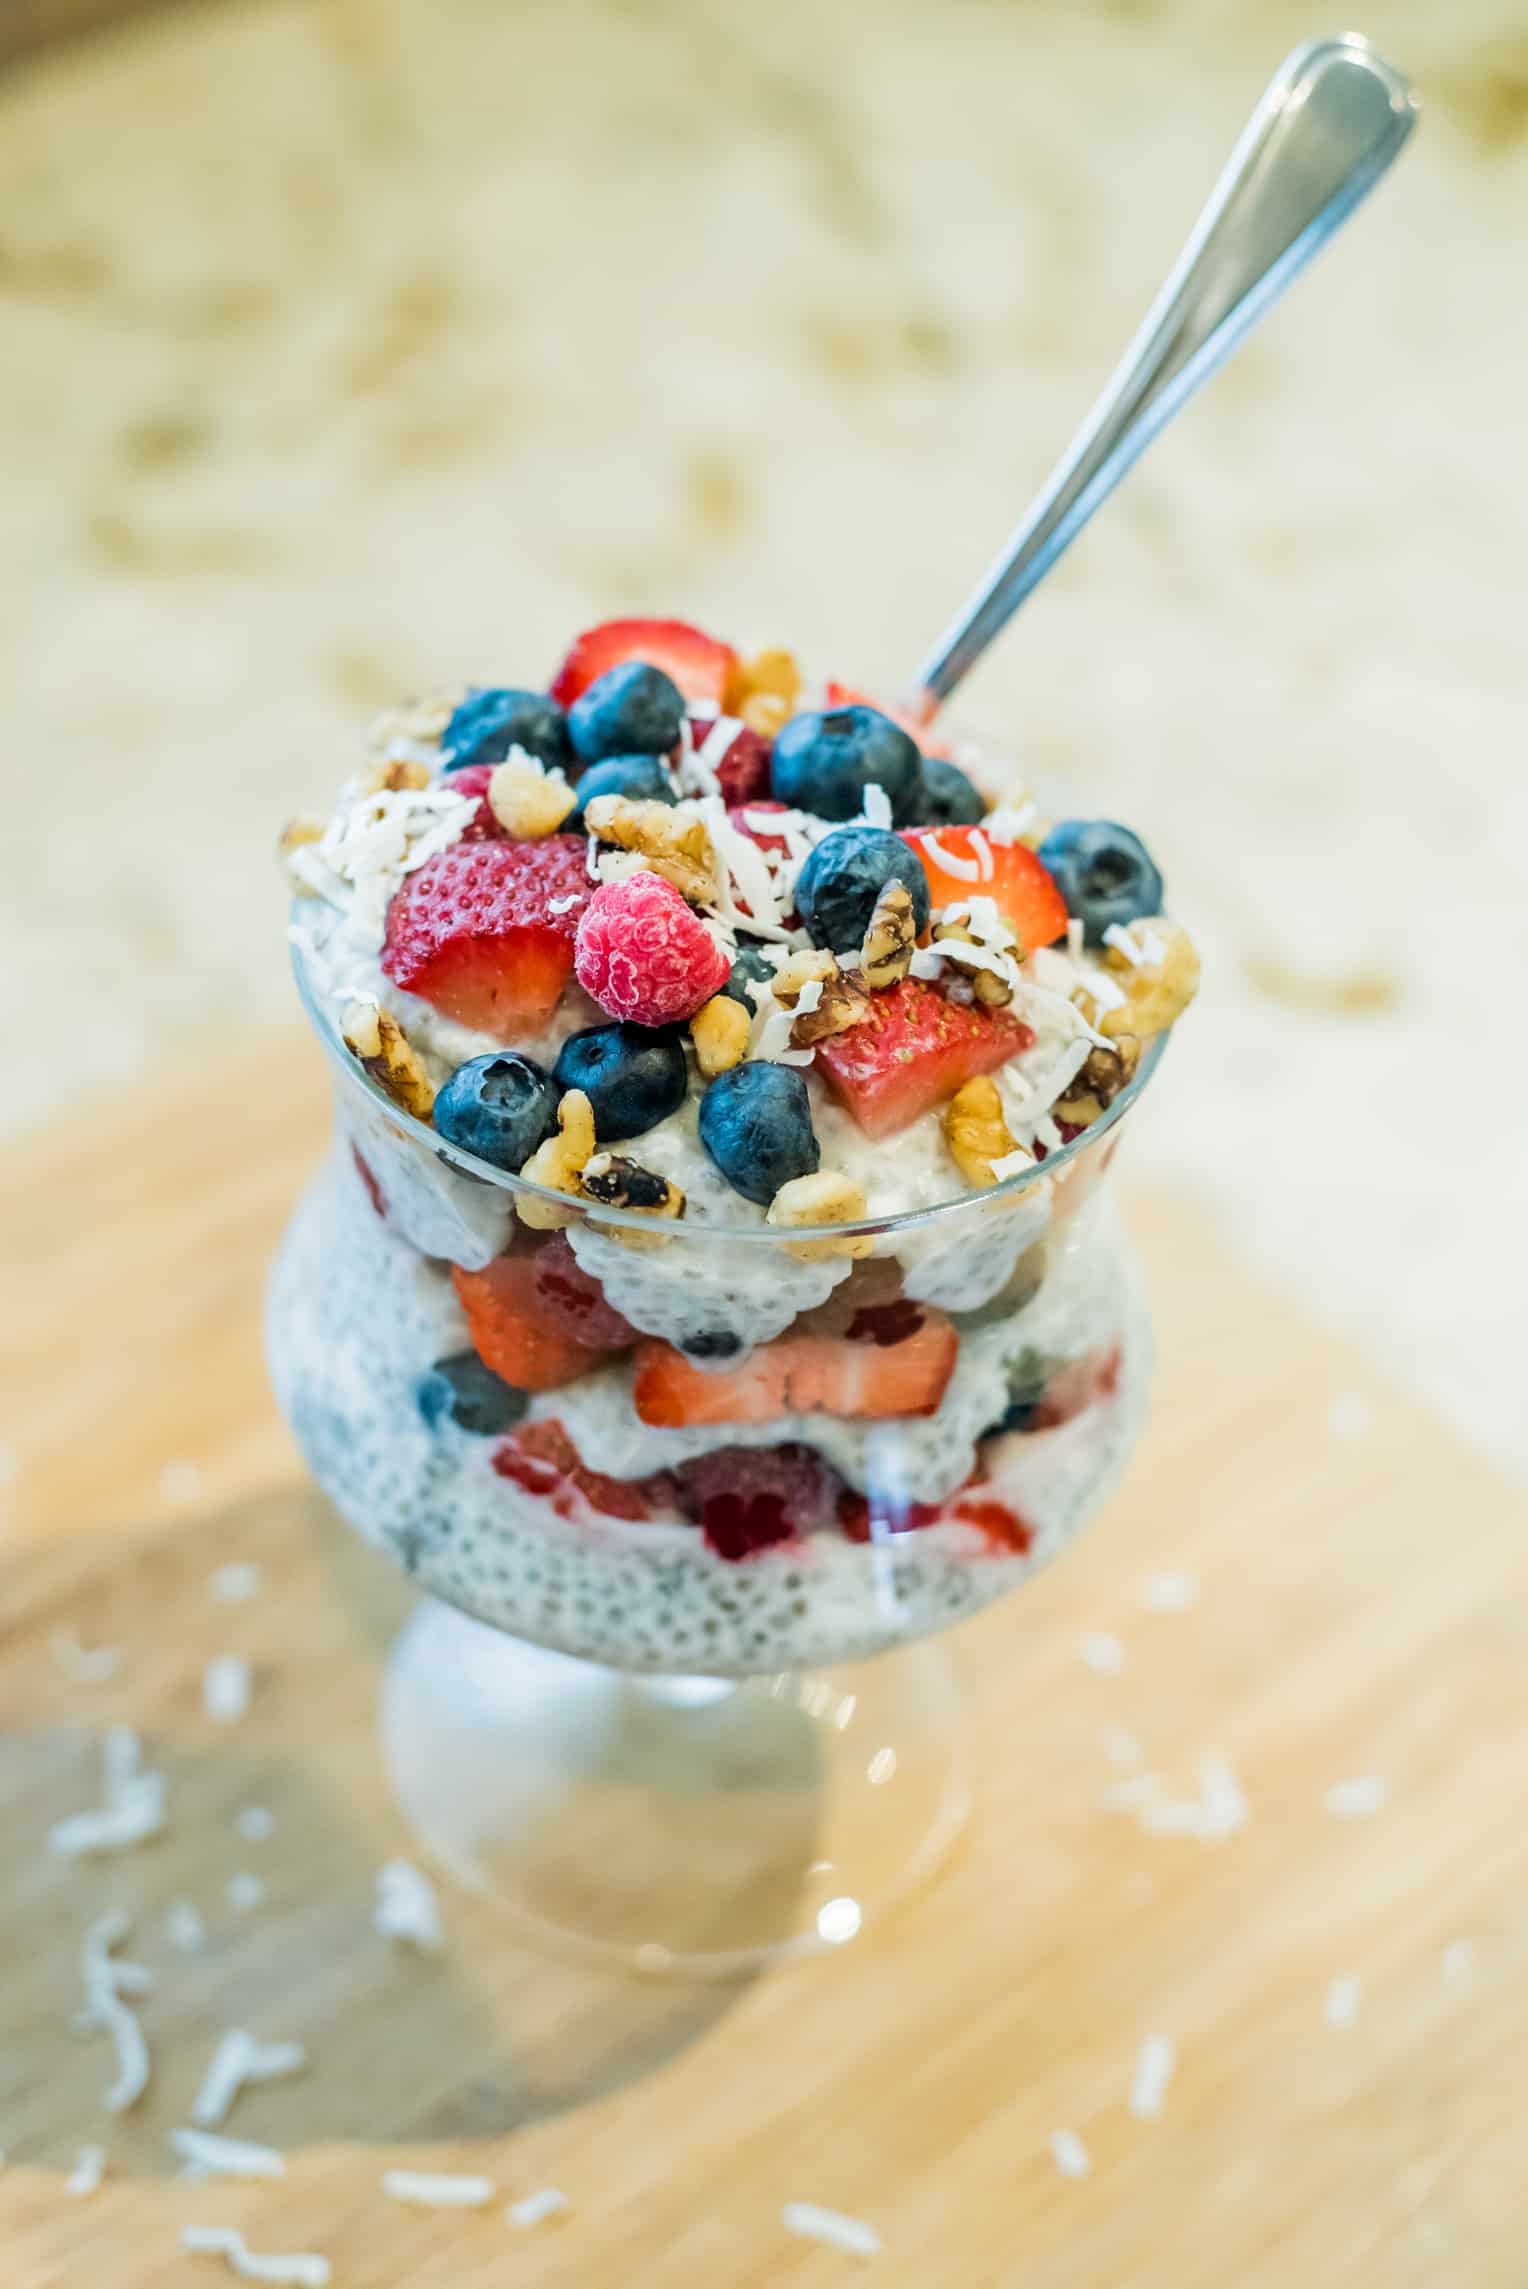 The 'Parfait' Chia Pudding - Healing Journey Services